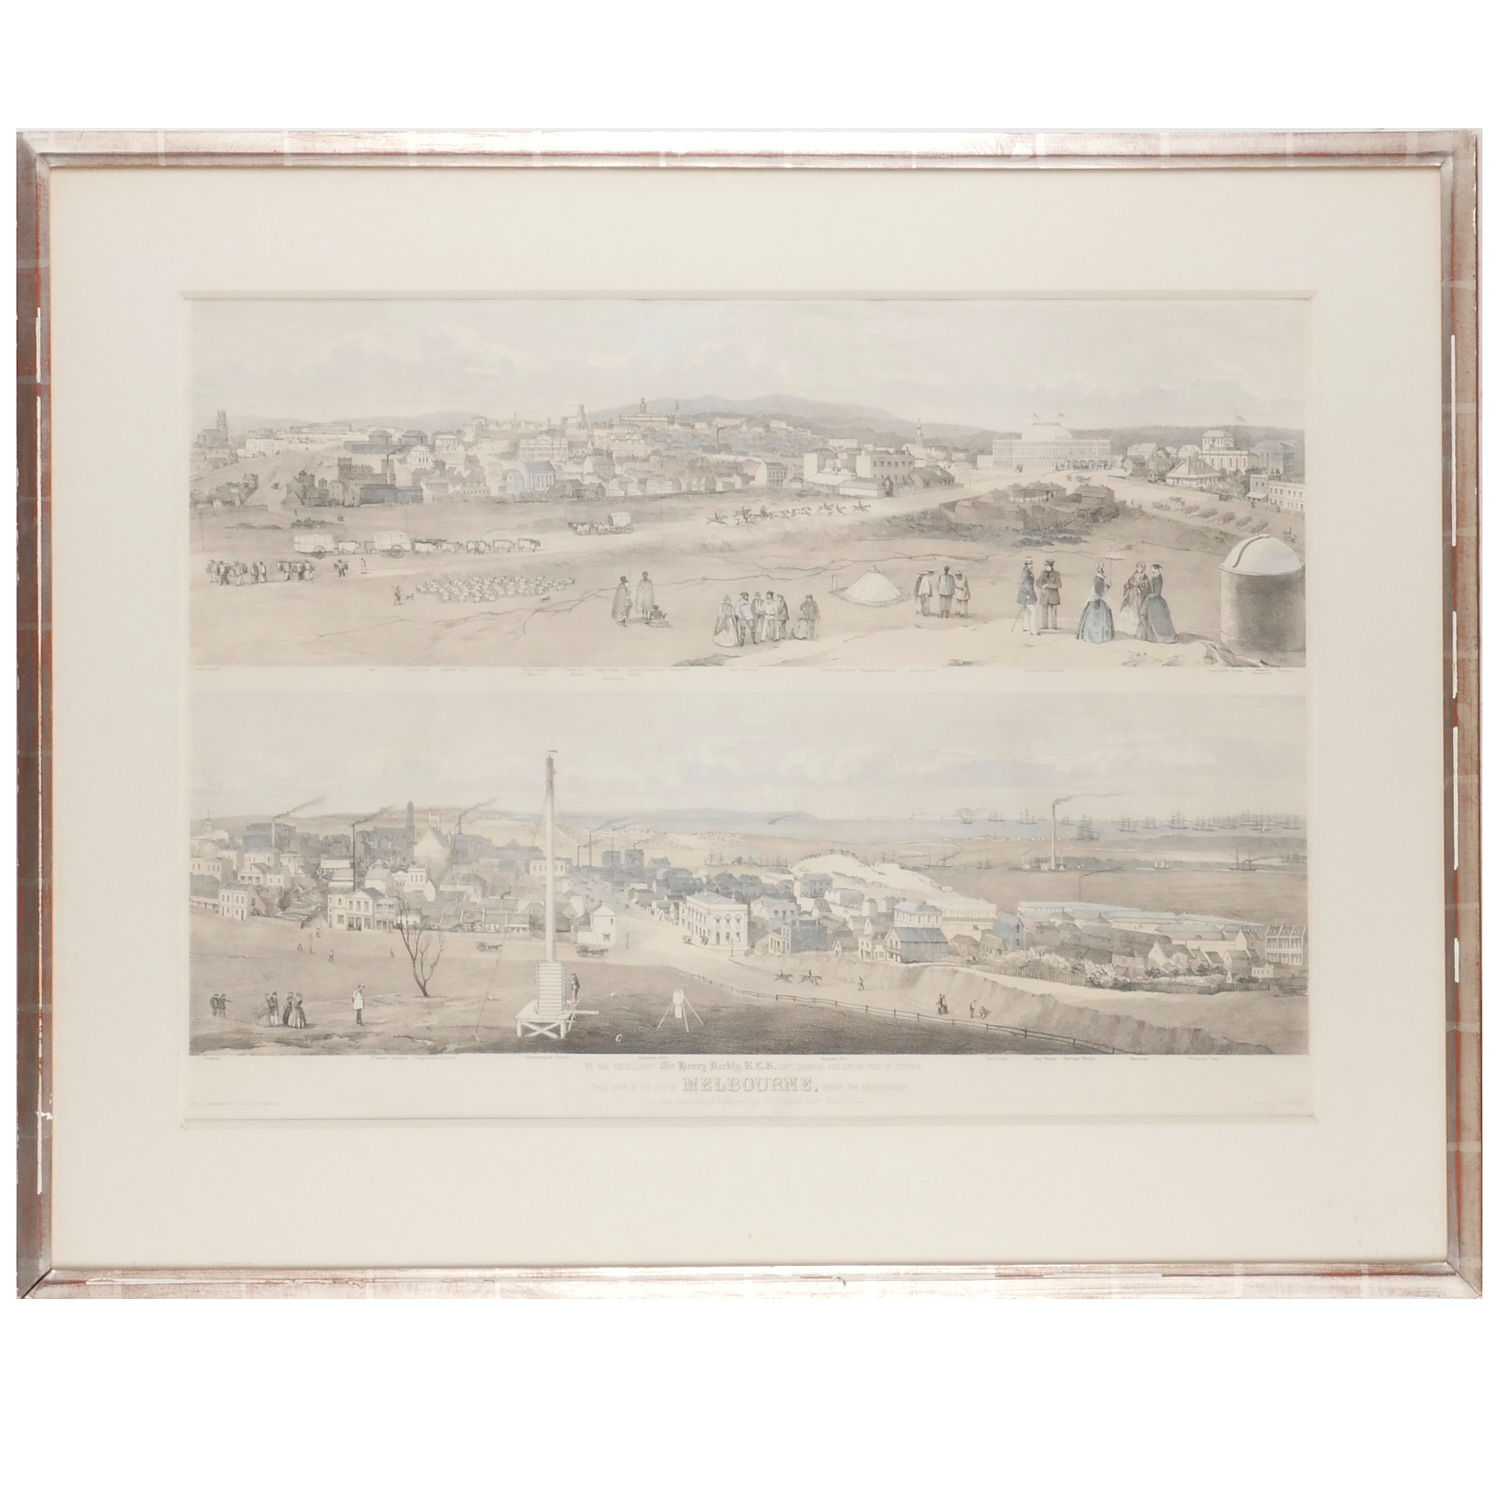 GEORGE ROWE, MELBOURNE LITHOGRAPH